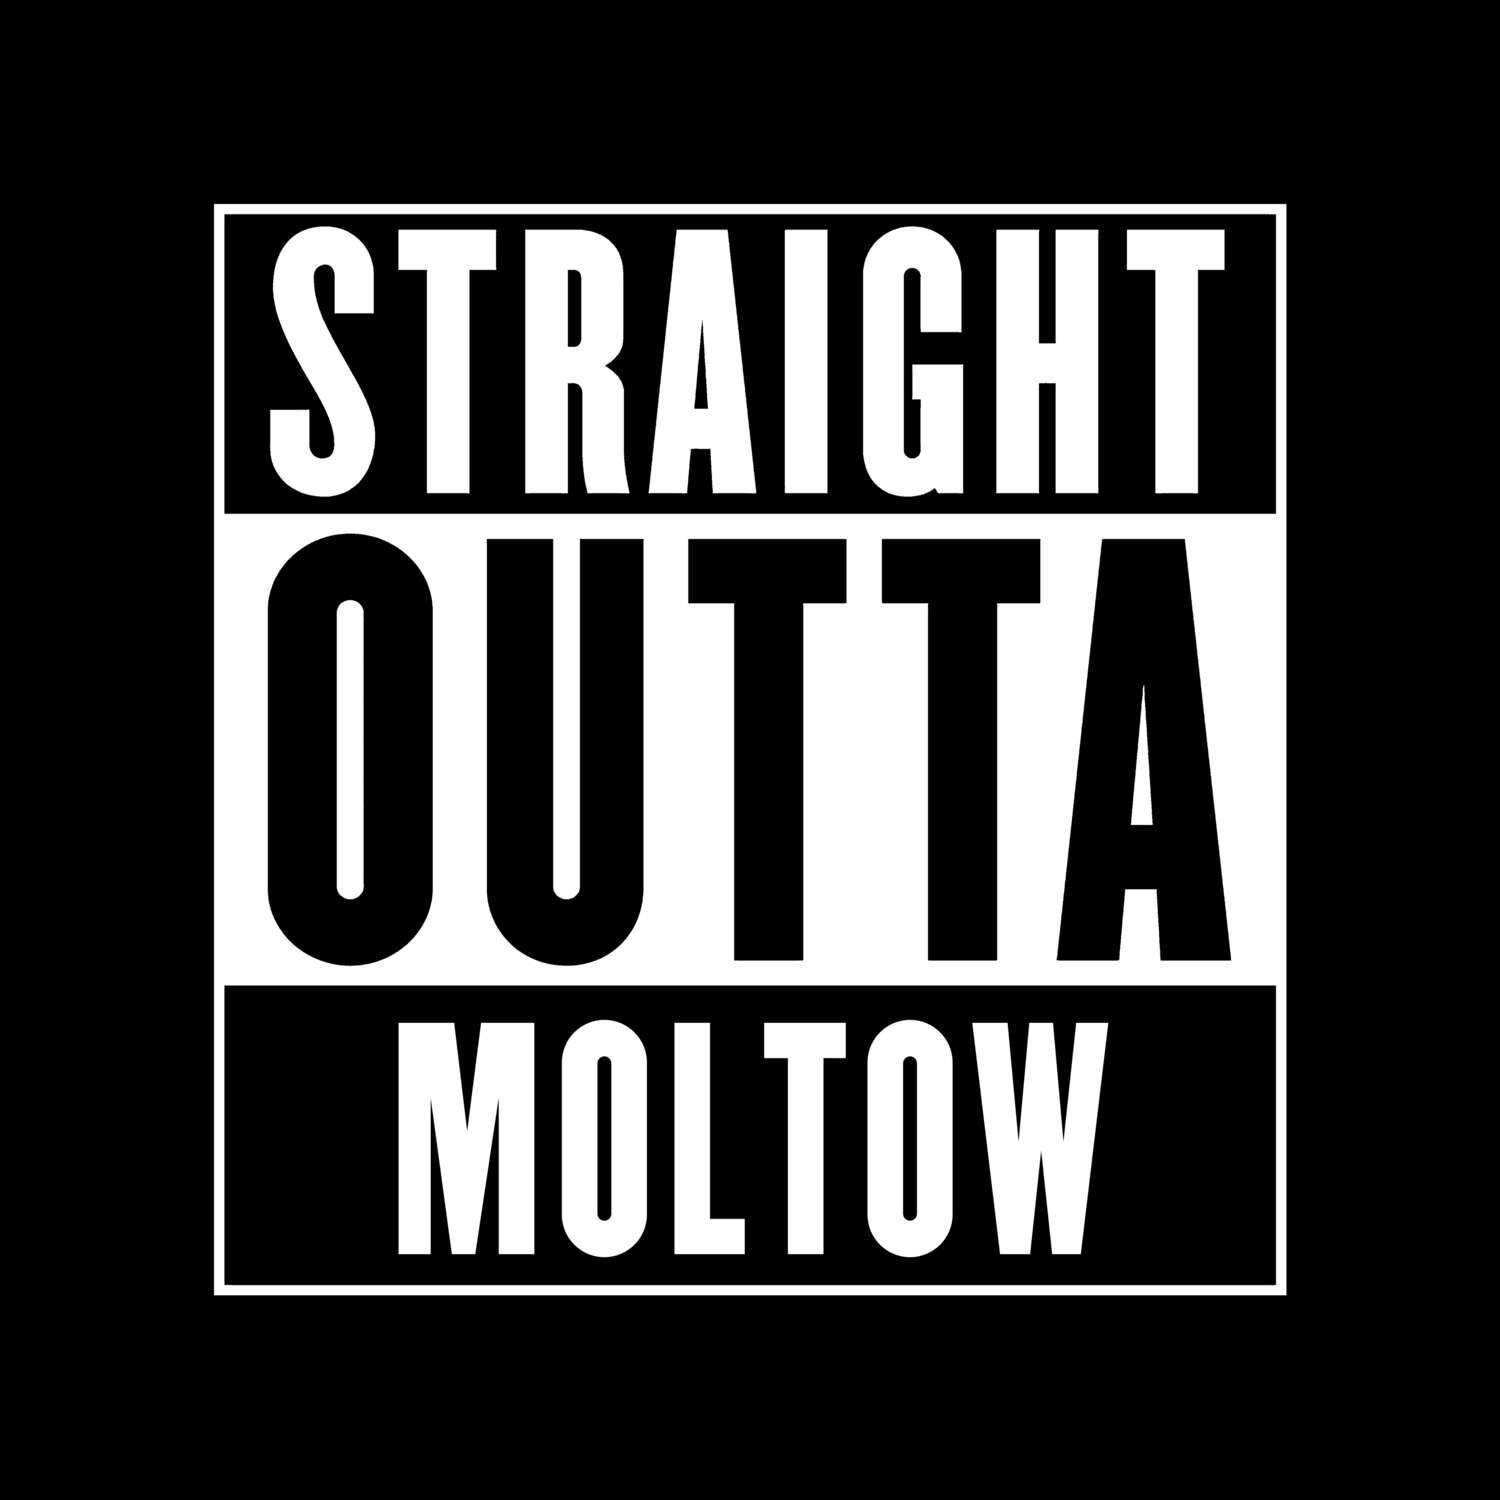 Moltow T-Shirt »Straight Outta«